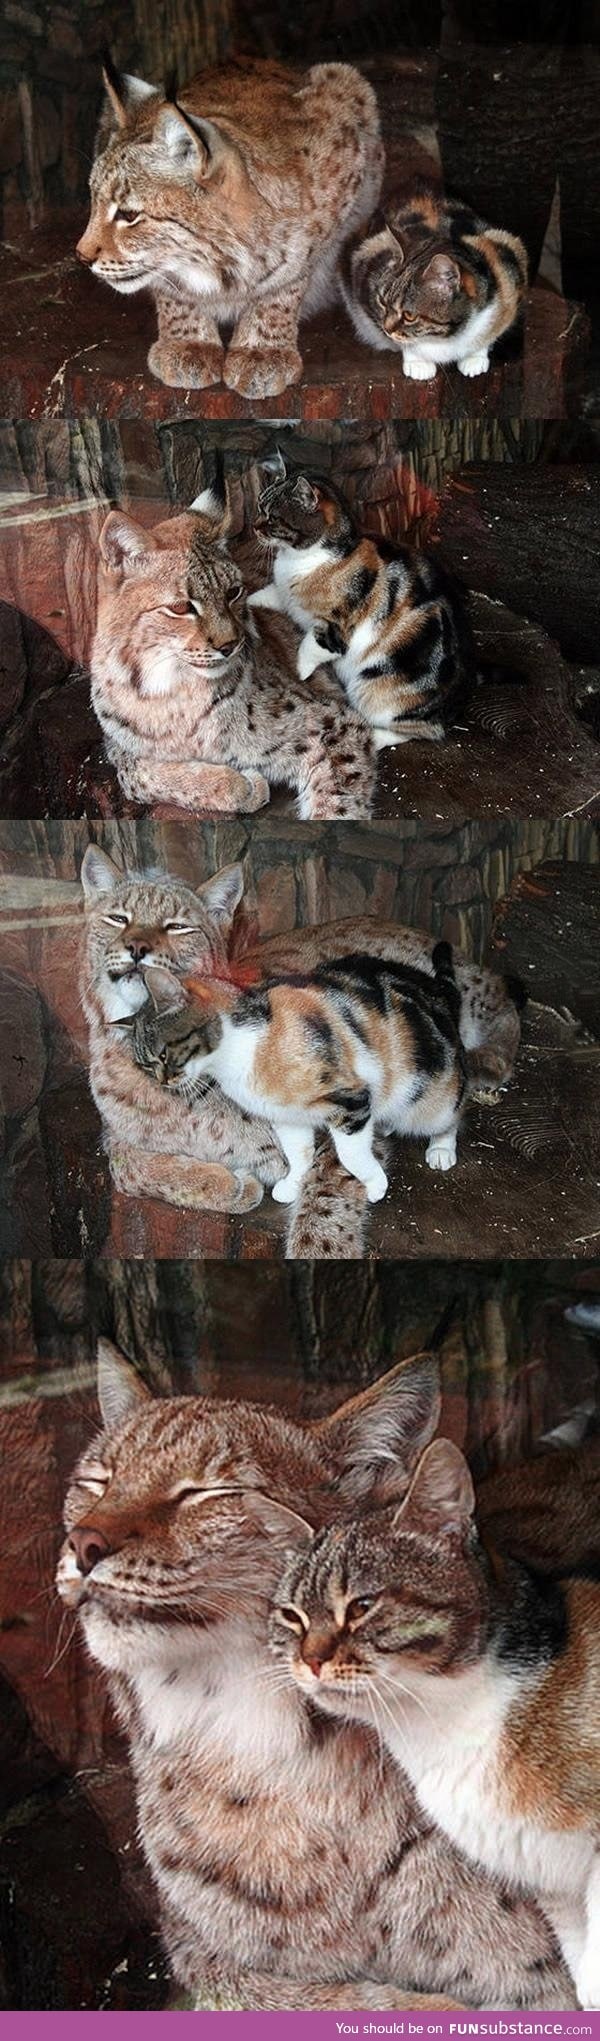 Stray cat sneaks into zoo enclosure, finds another cat